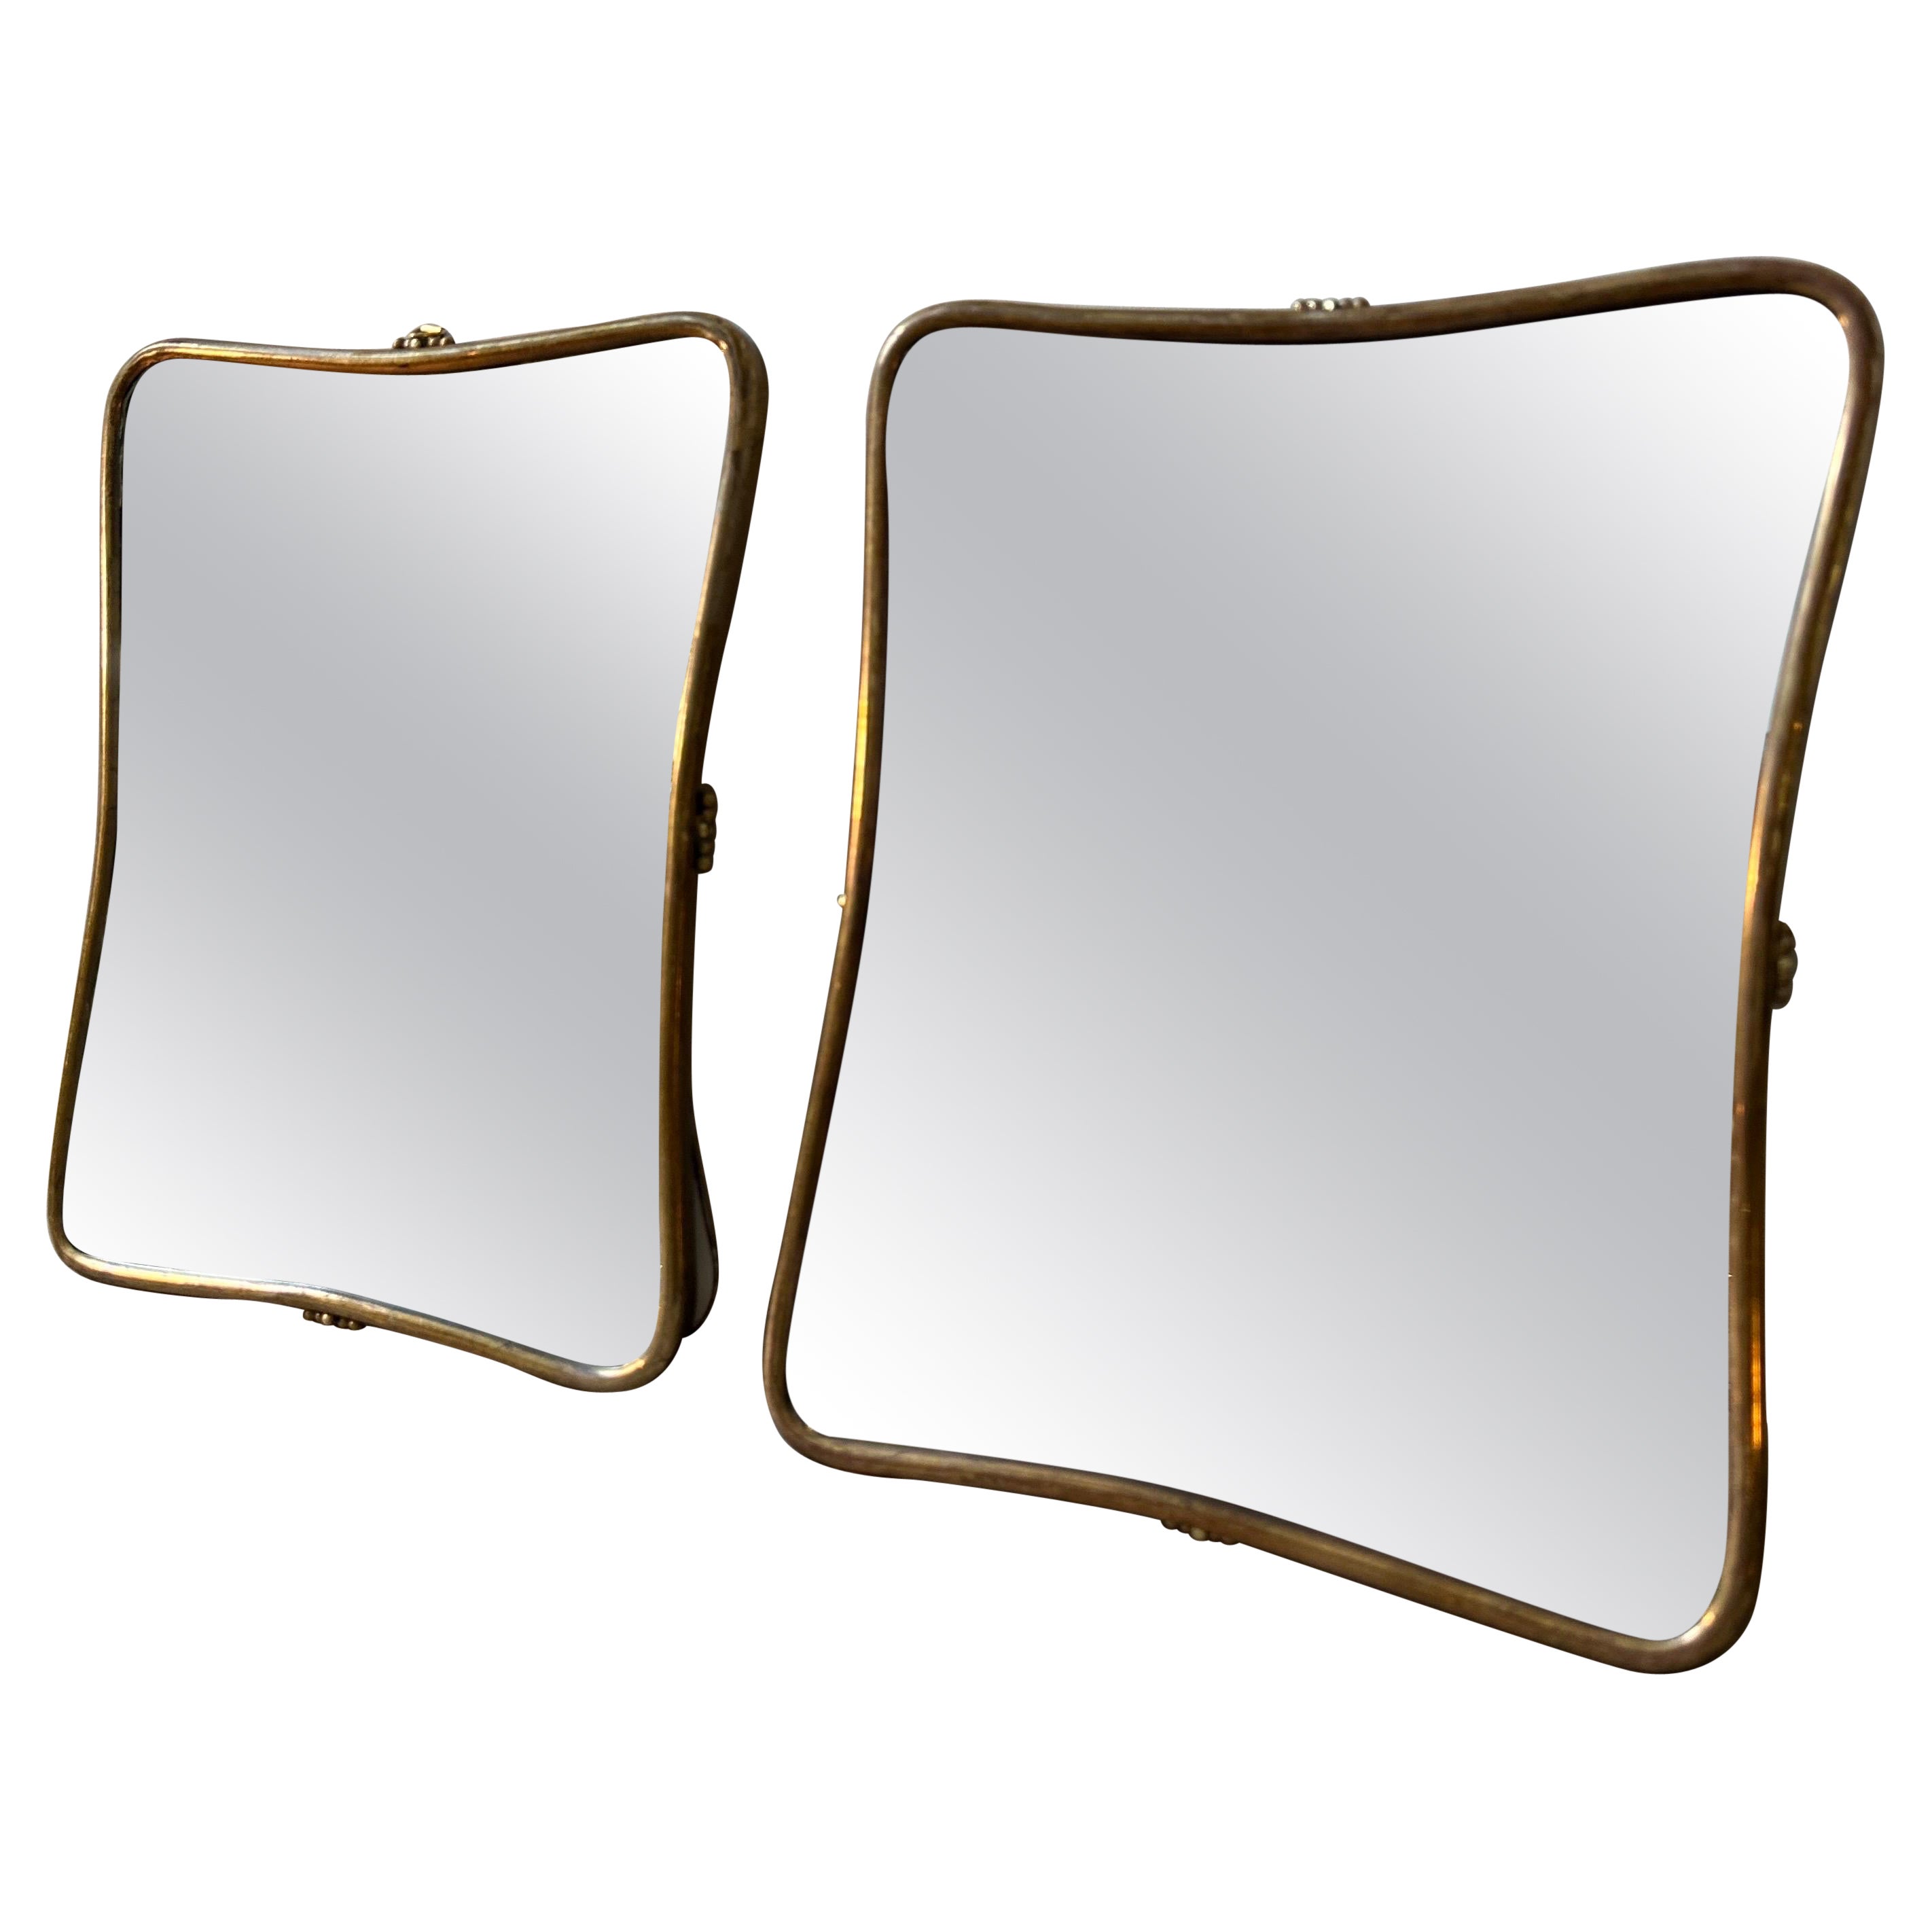 A pair of 1950s Gio Ponti Style Mid-Century Modern Brass Small Wall Mirrors For Sale